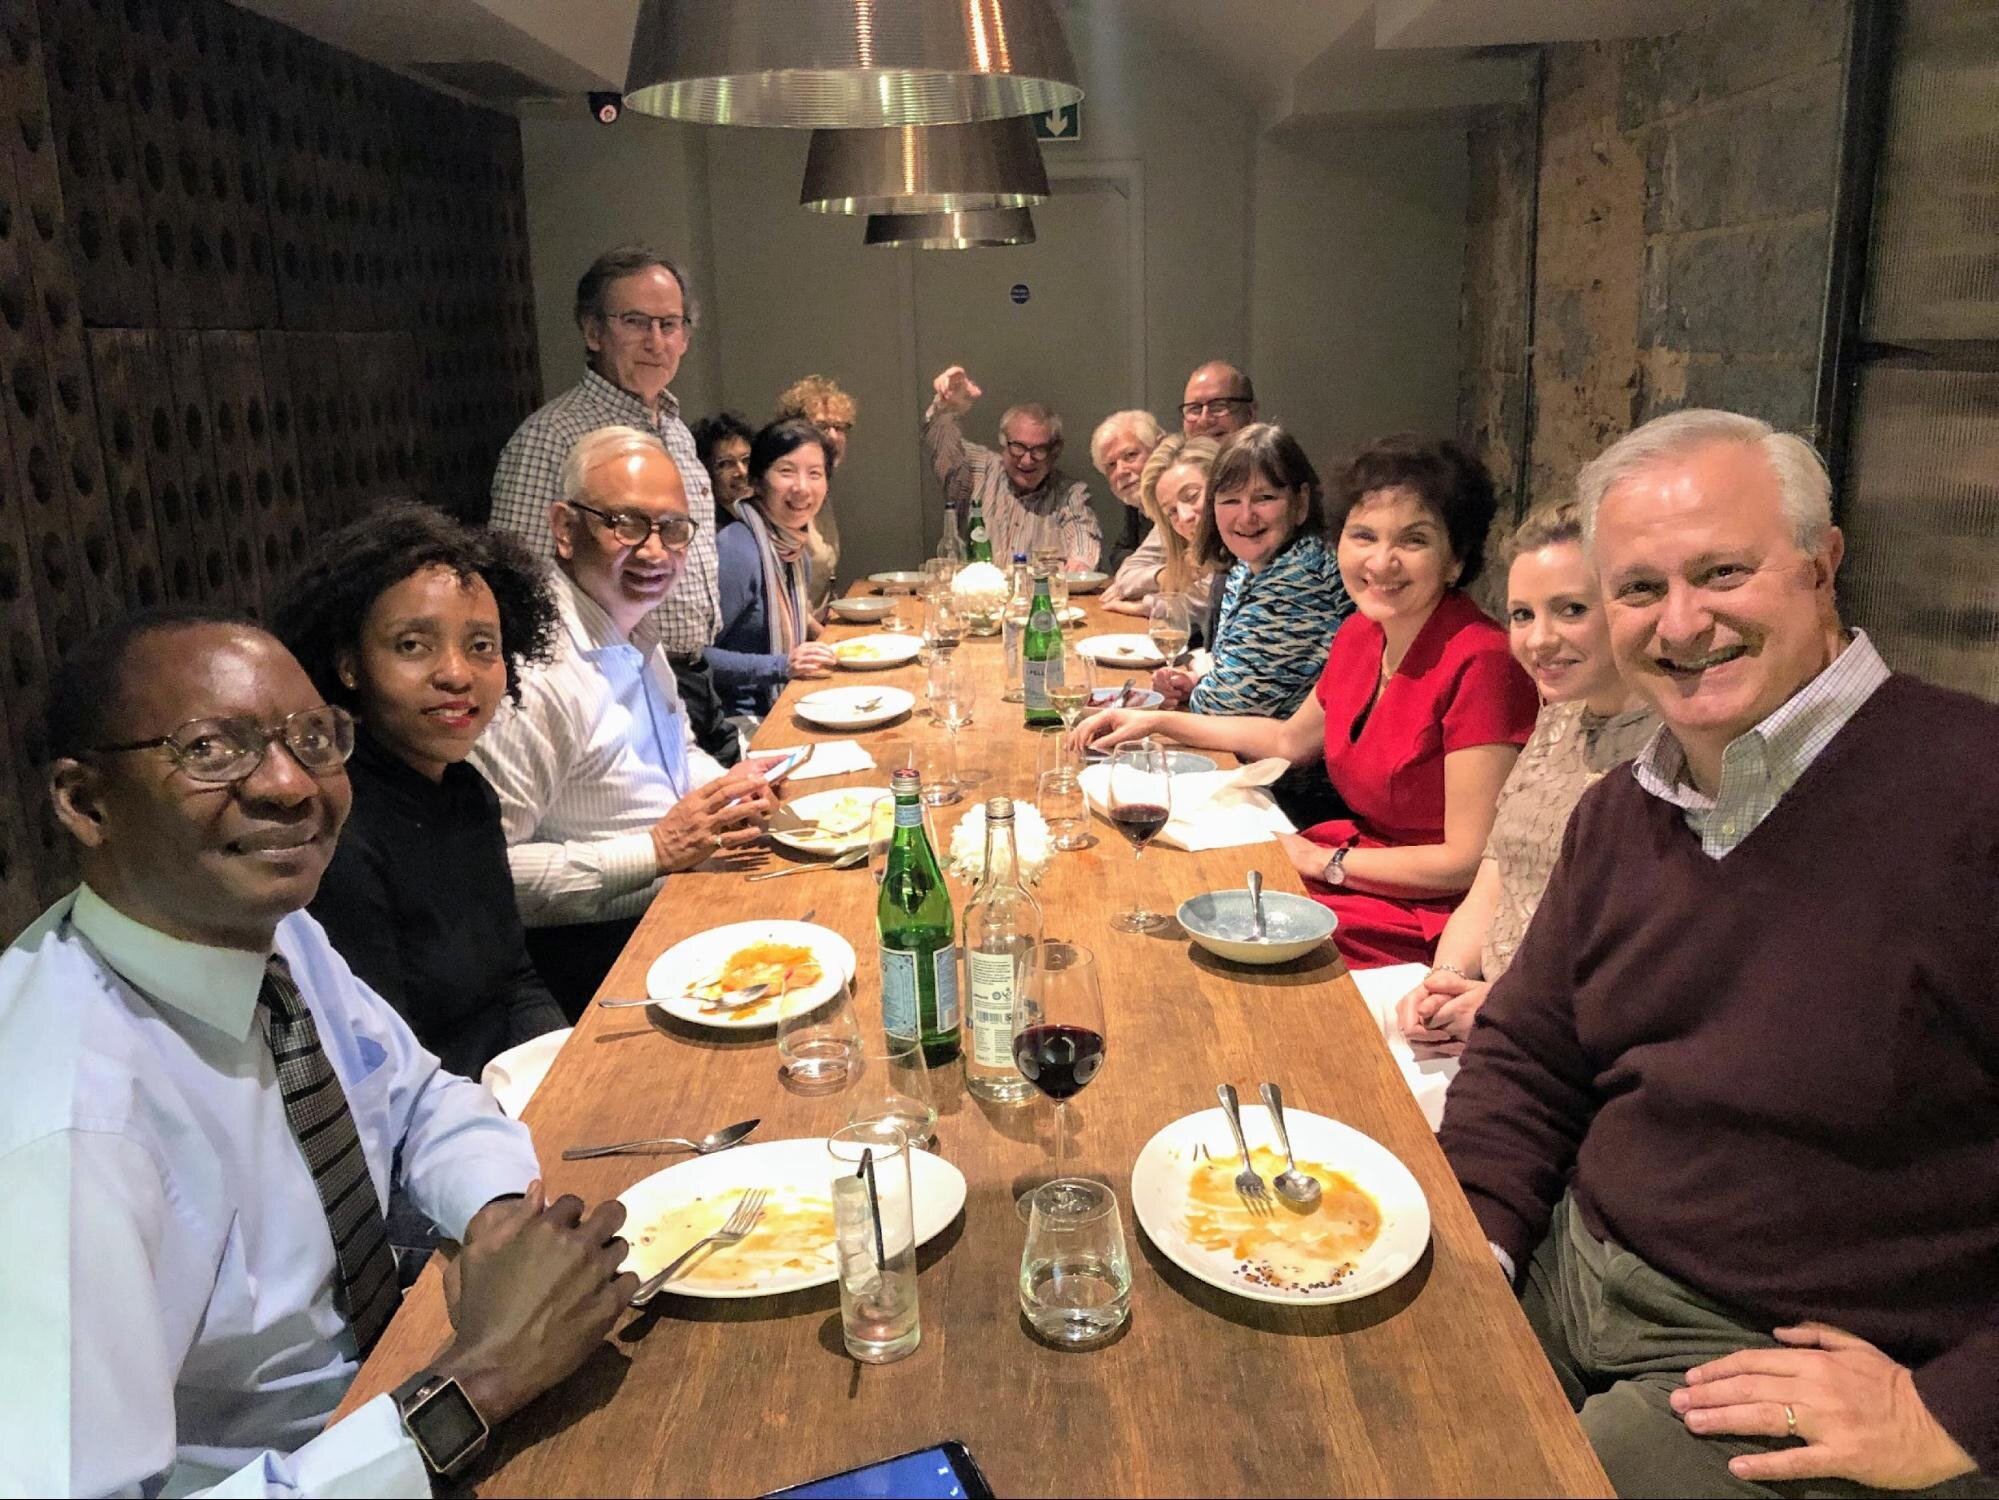  Phil meeting with global leaders from several nations, including Australia, Canada, Chile, China, Great Britain, Greece, India, Ireland, Scotland and Zambia to build a strategy for elevating impact in the global epilepsy community. 